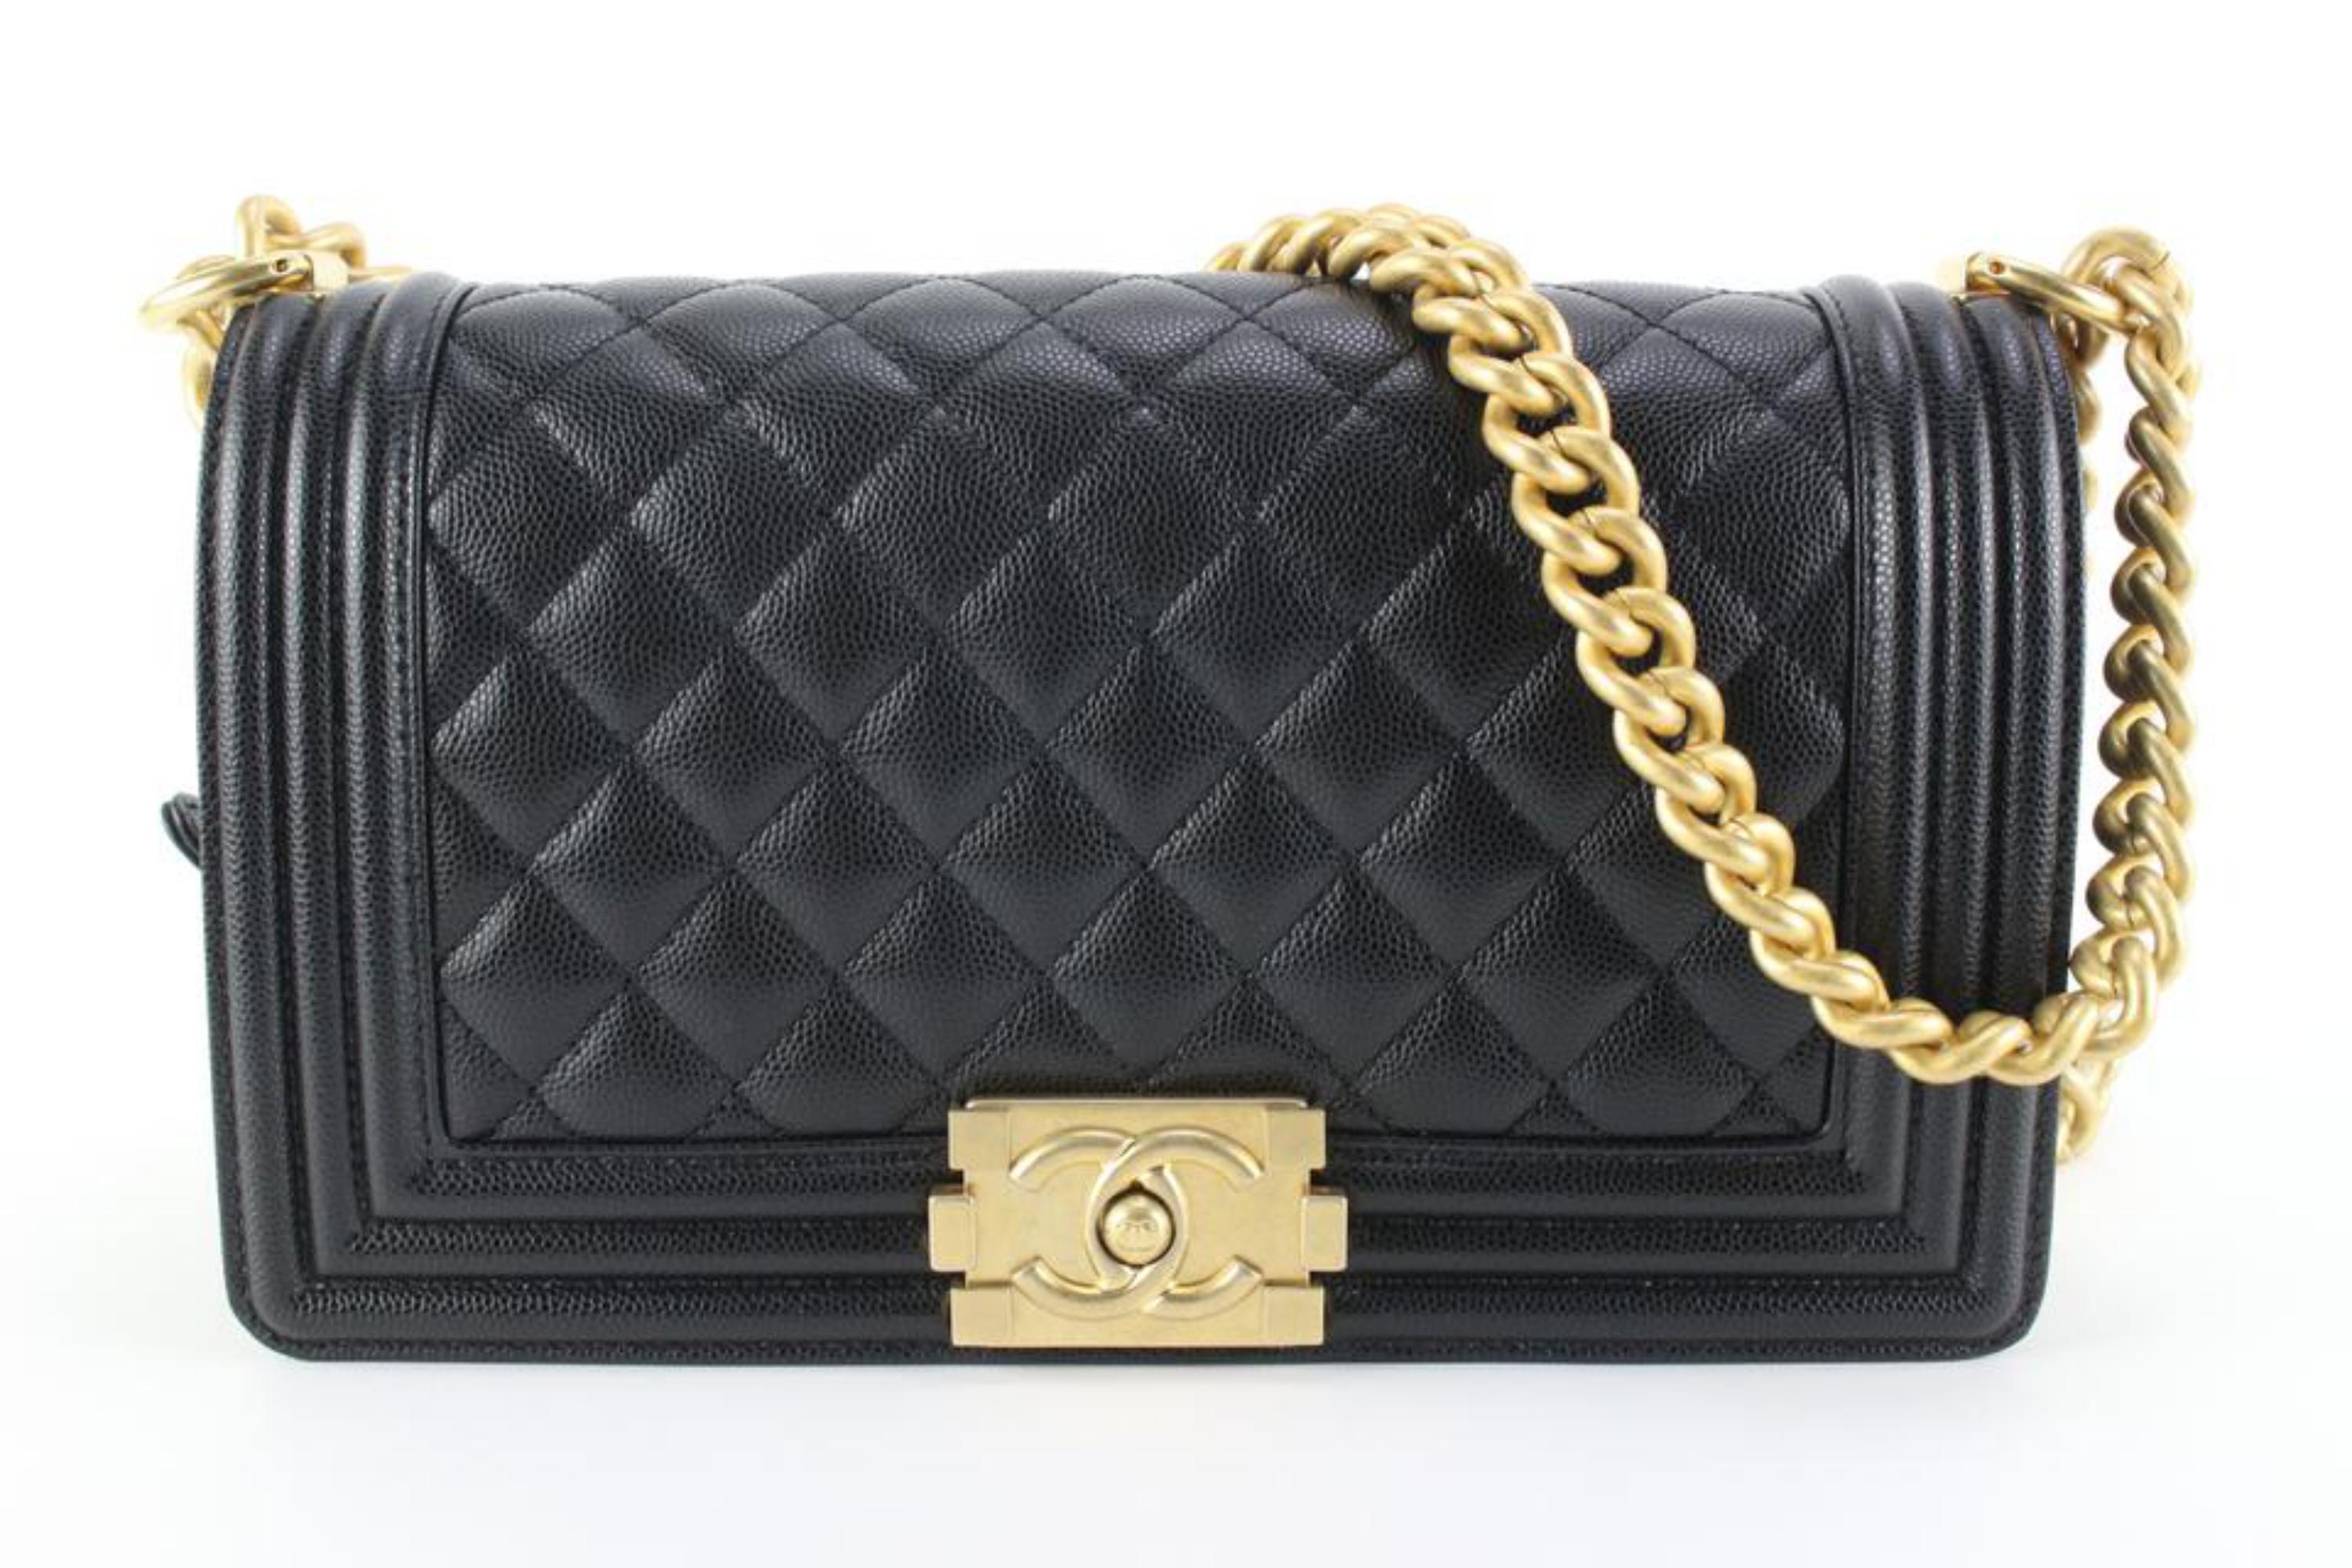 Chanel Black Quilted Caviar Leather Medium Boy Gold Chain Bag 84ck85s 4